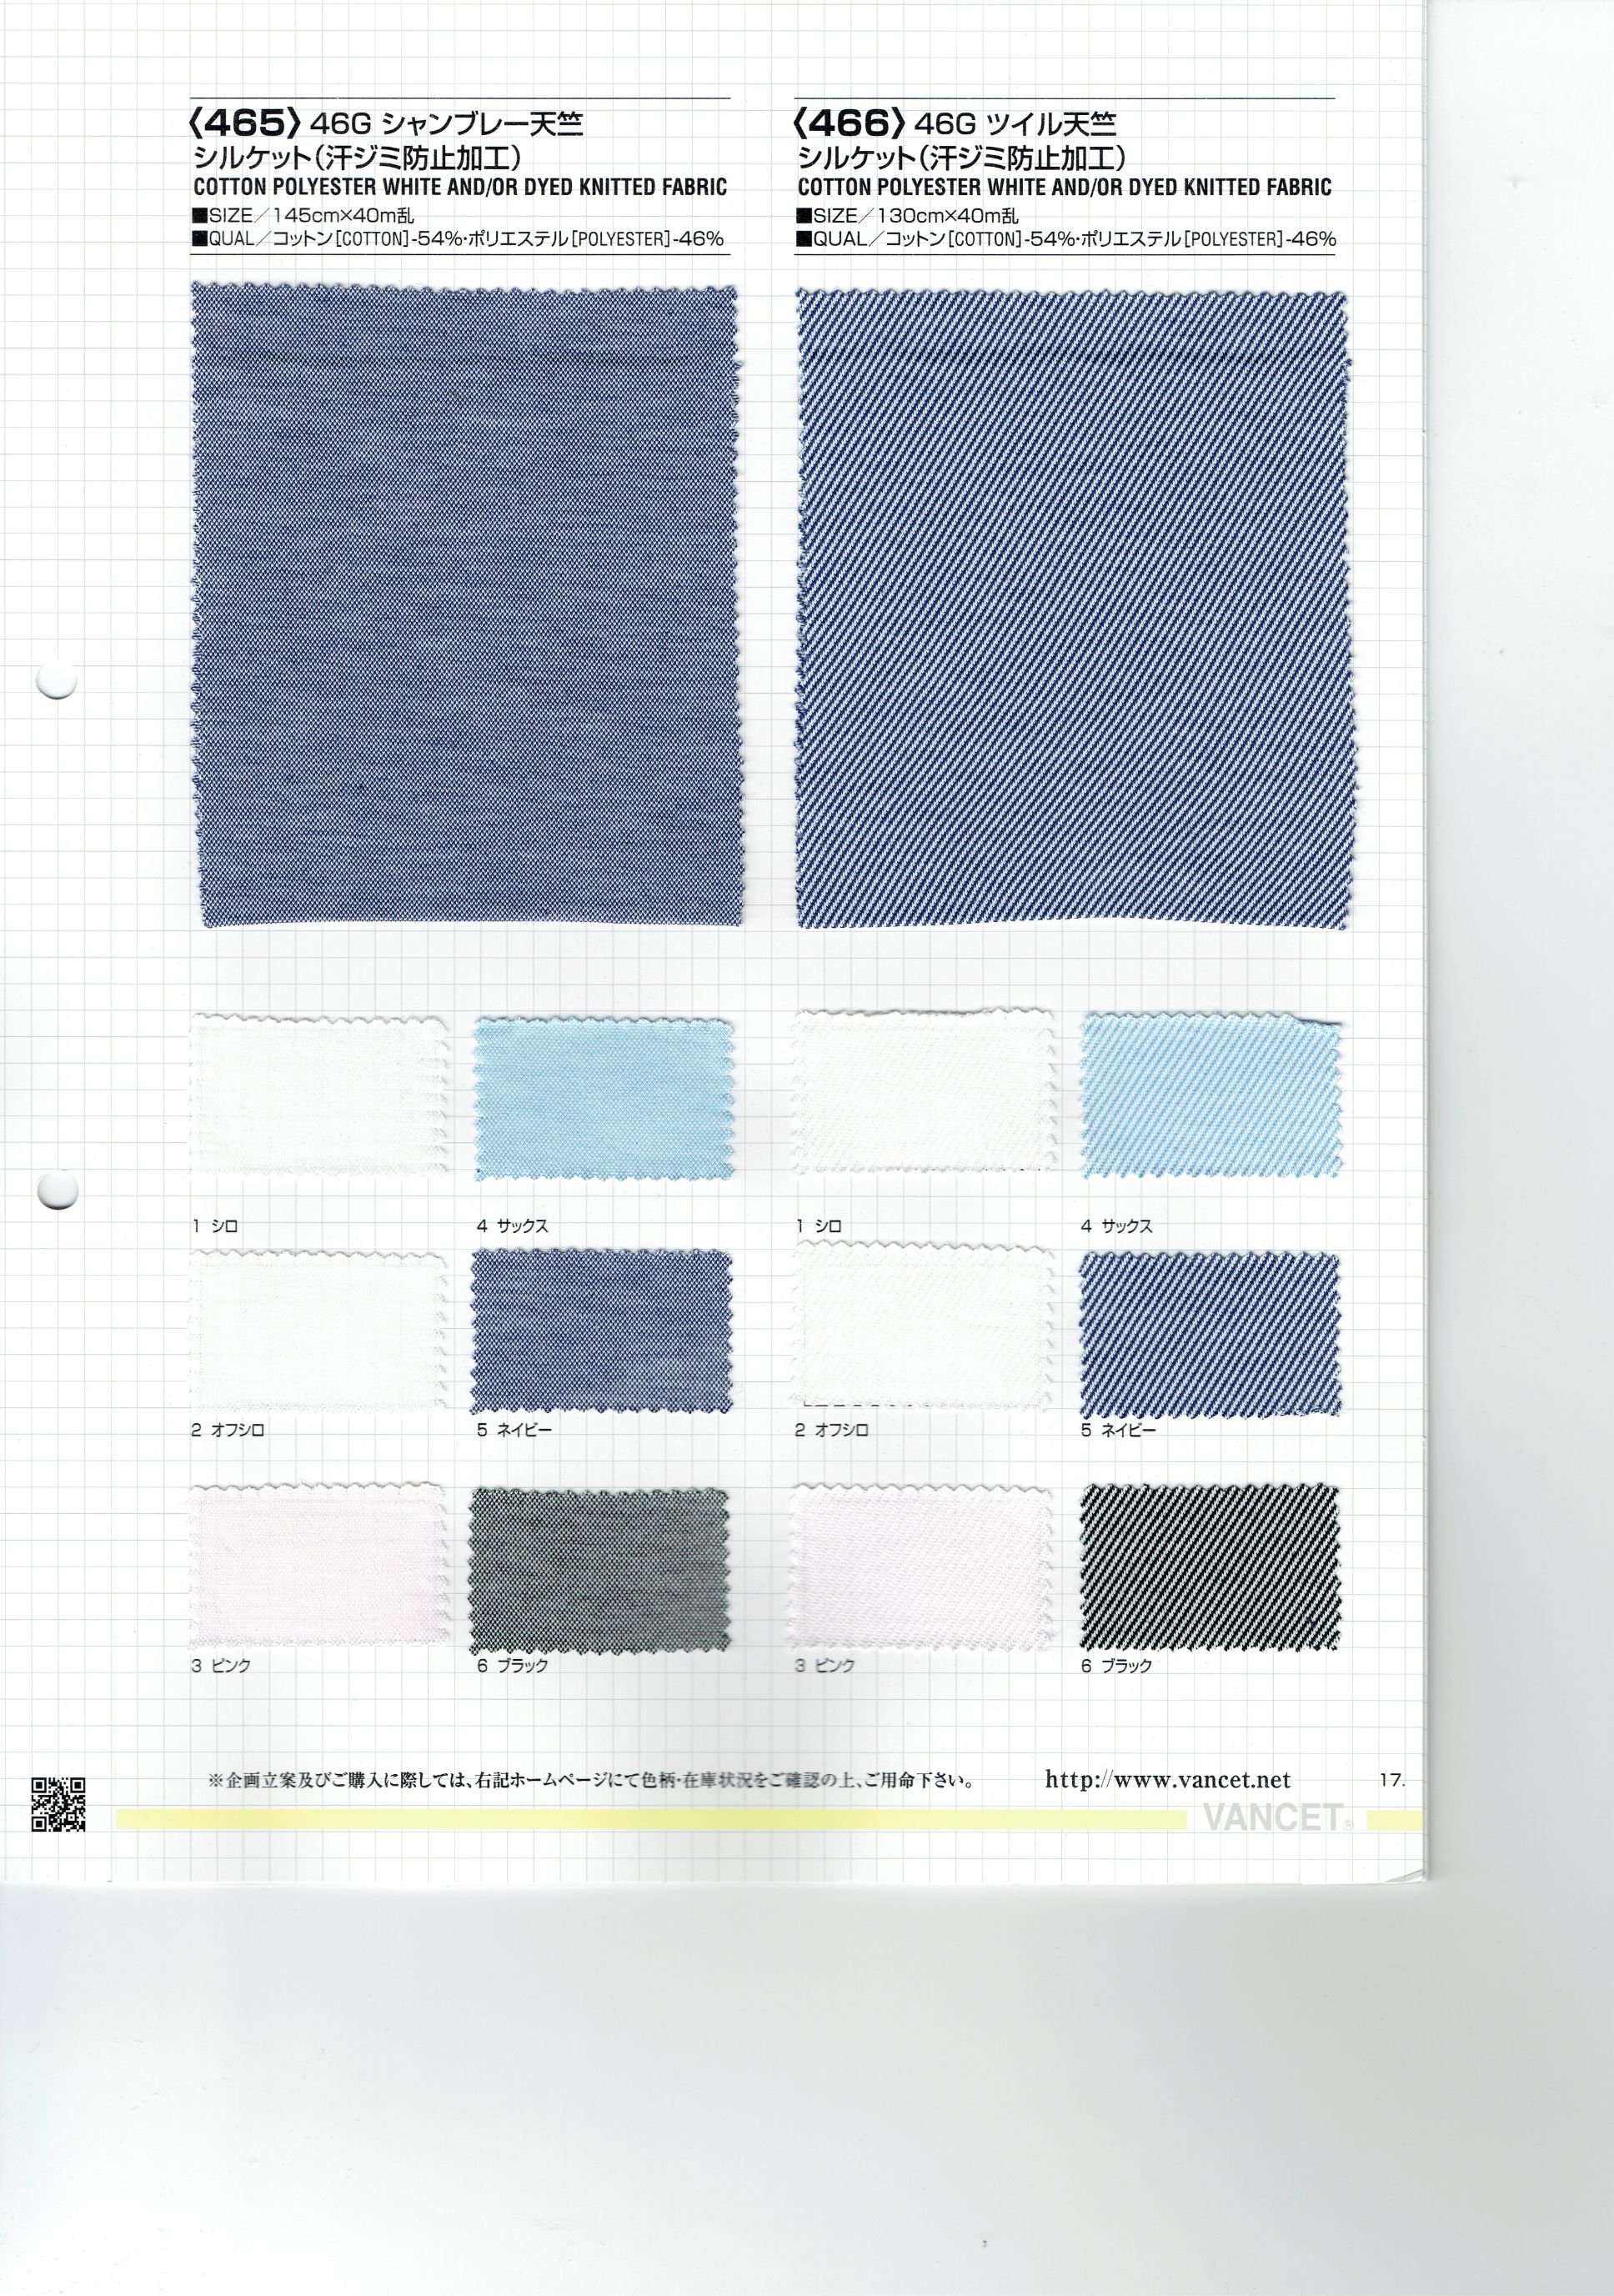 View 54% COTTON 46% POLYESTER WHITE AND/OR DYED KNITTED FABRIC